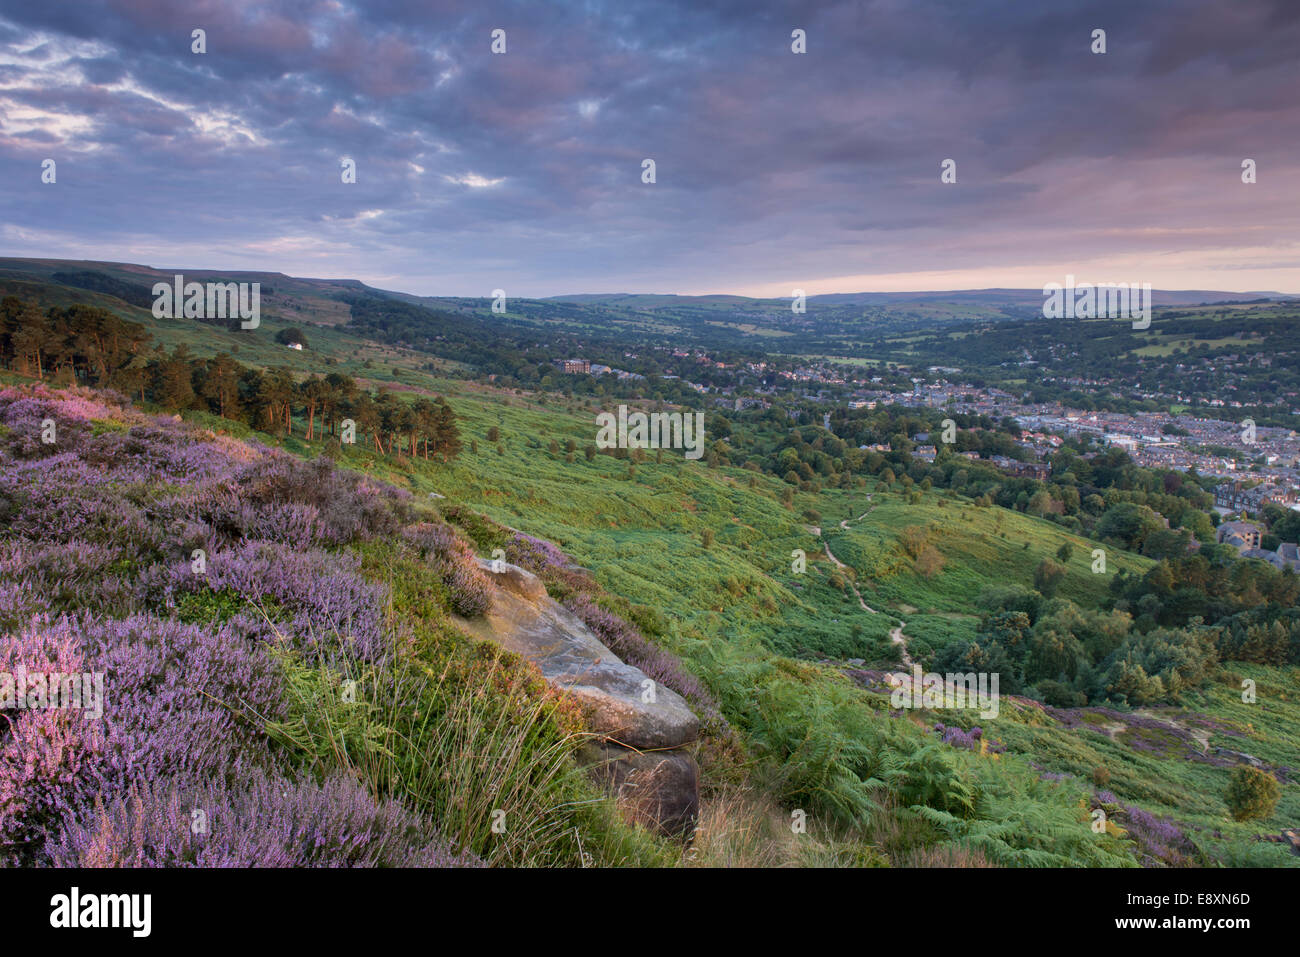 Under dramatic clouds, scenic rural morning sunrise view from high on Ilkley Moor, over town nestling in Wharfe Valley - West Yorkshire, England, UK. Stock Photo